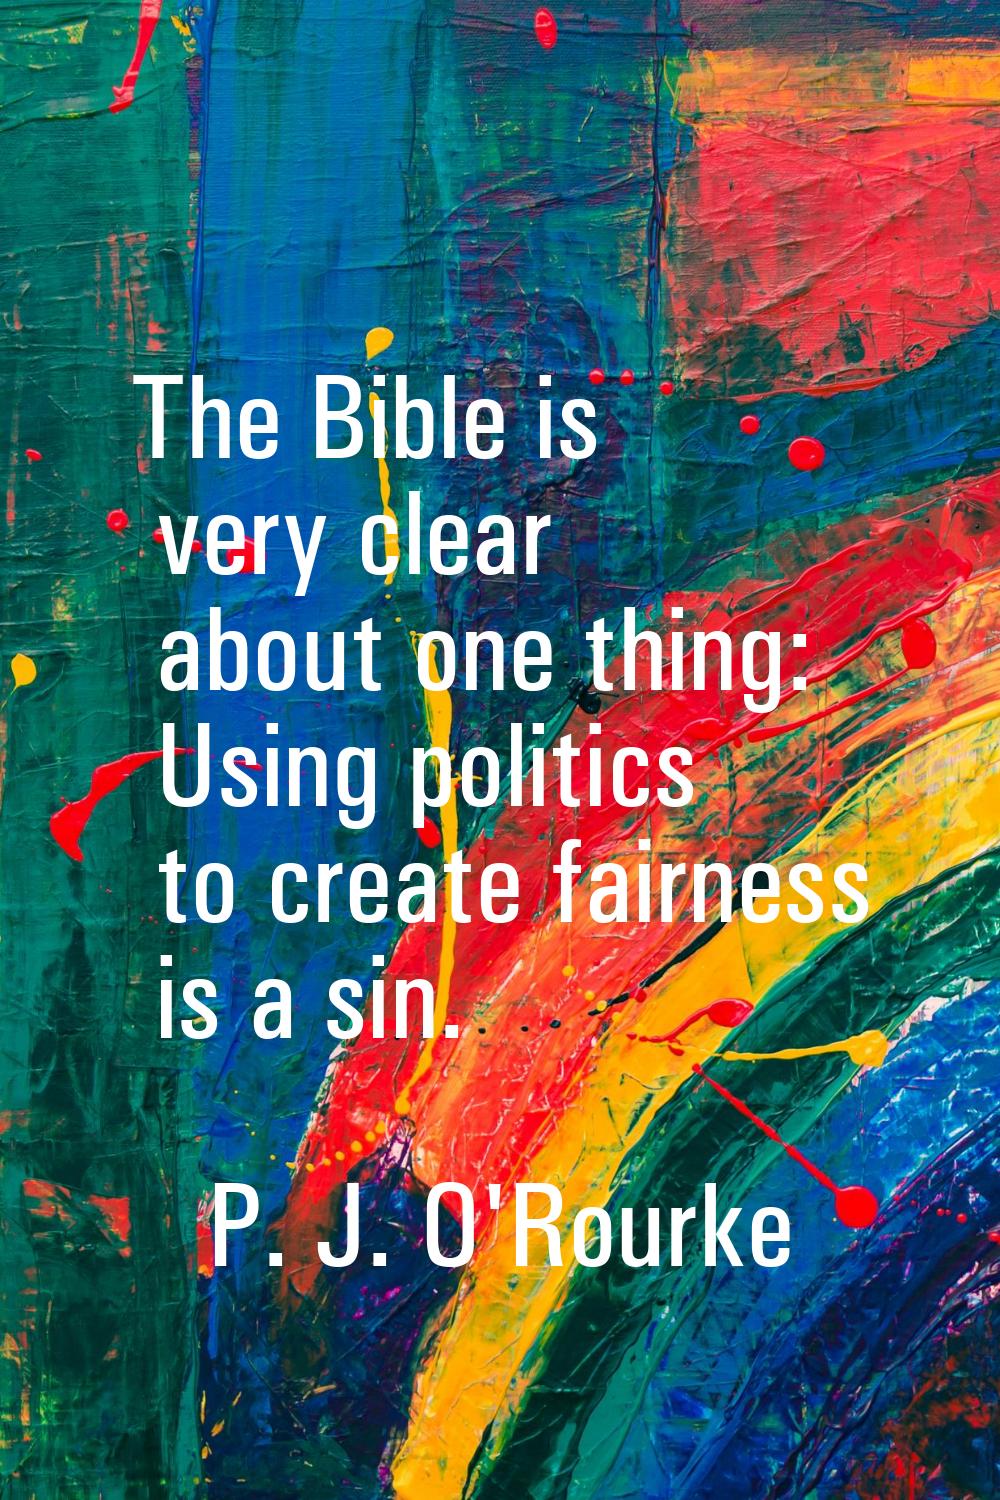 The Bible is very clear about one thing: Using politics to create fairness is a sin.